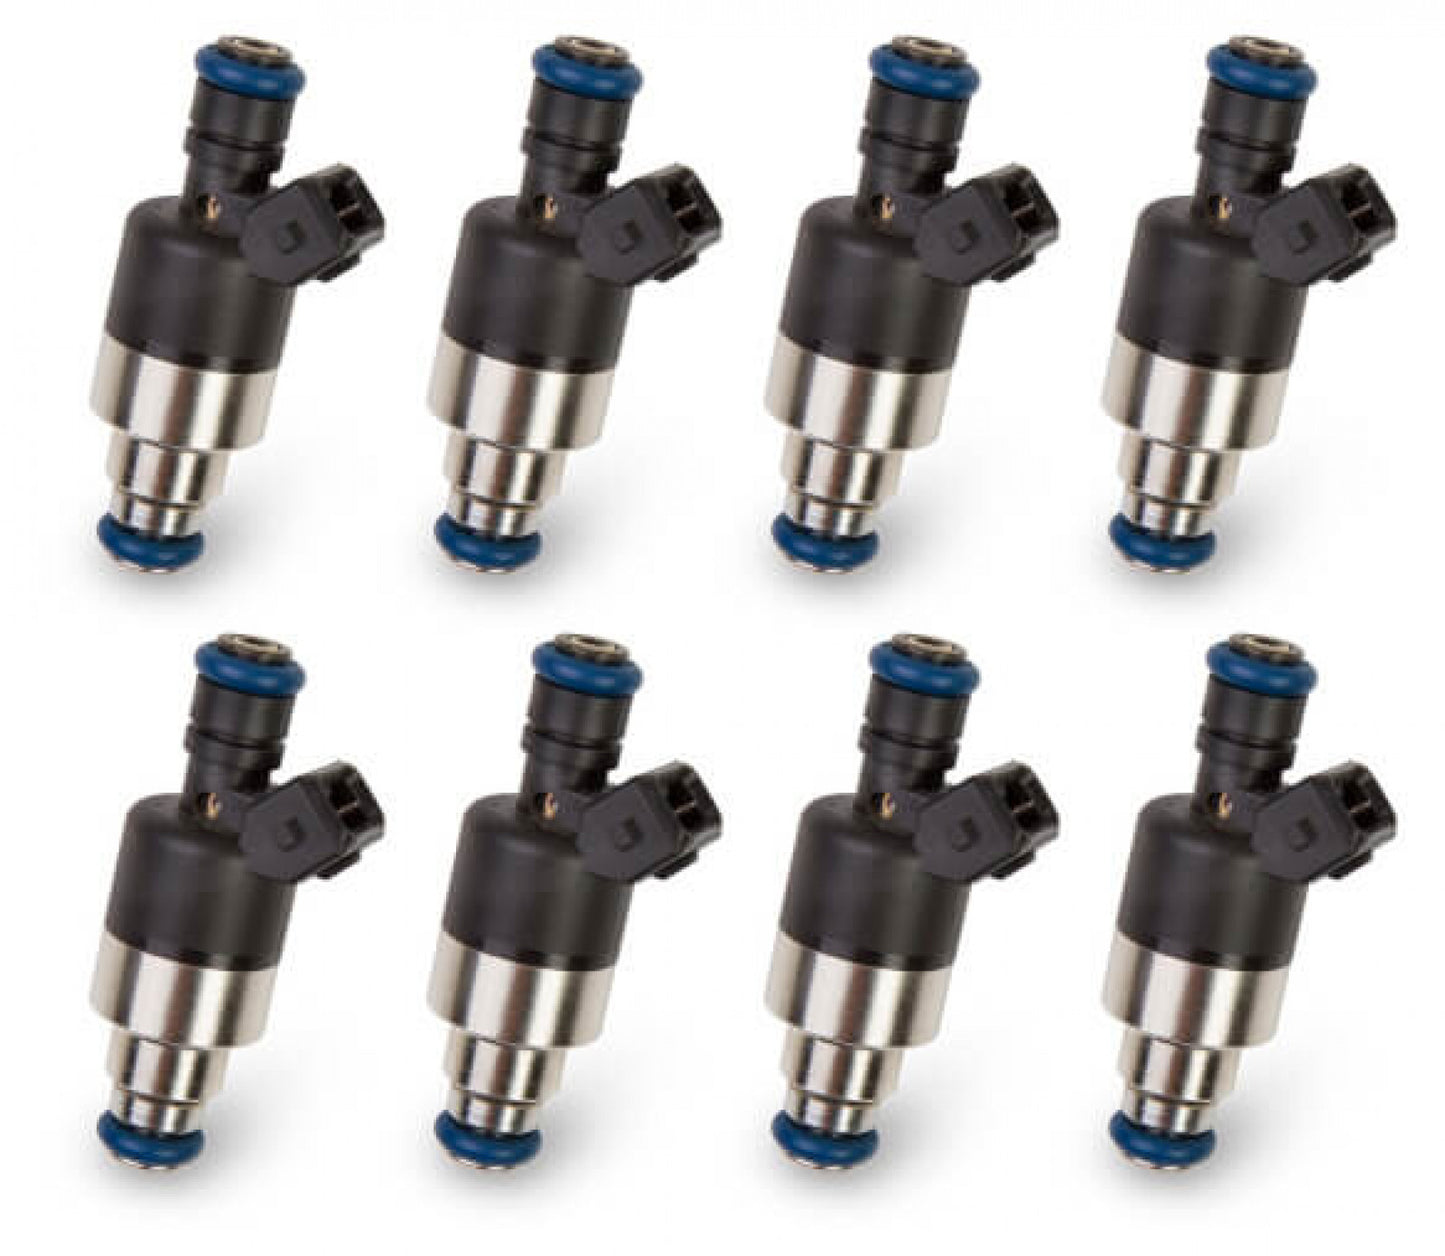 Holley EFI Performance Fuel Injectors - Set of Eight 522-198